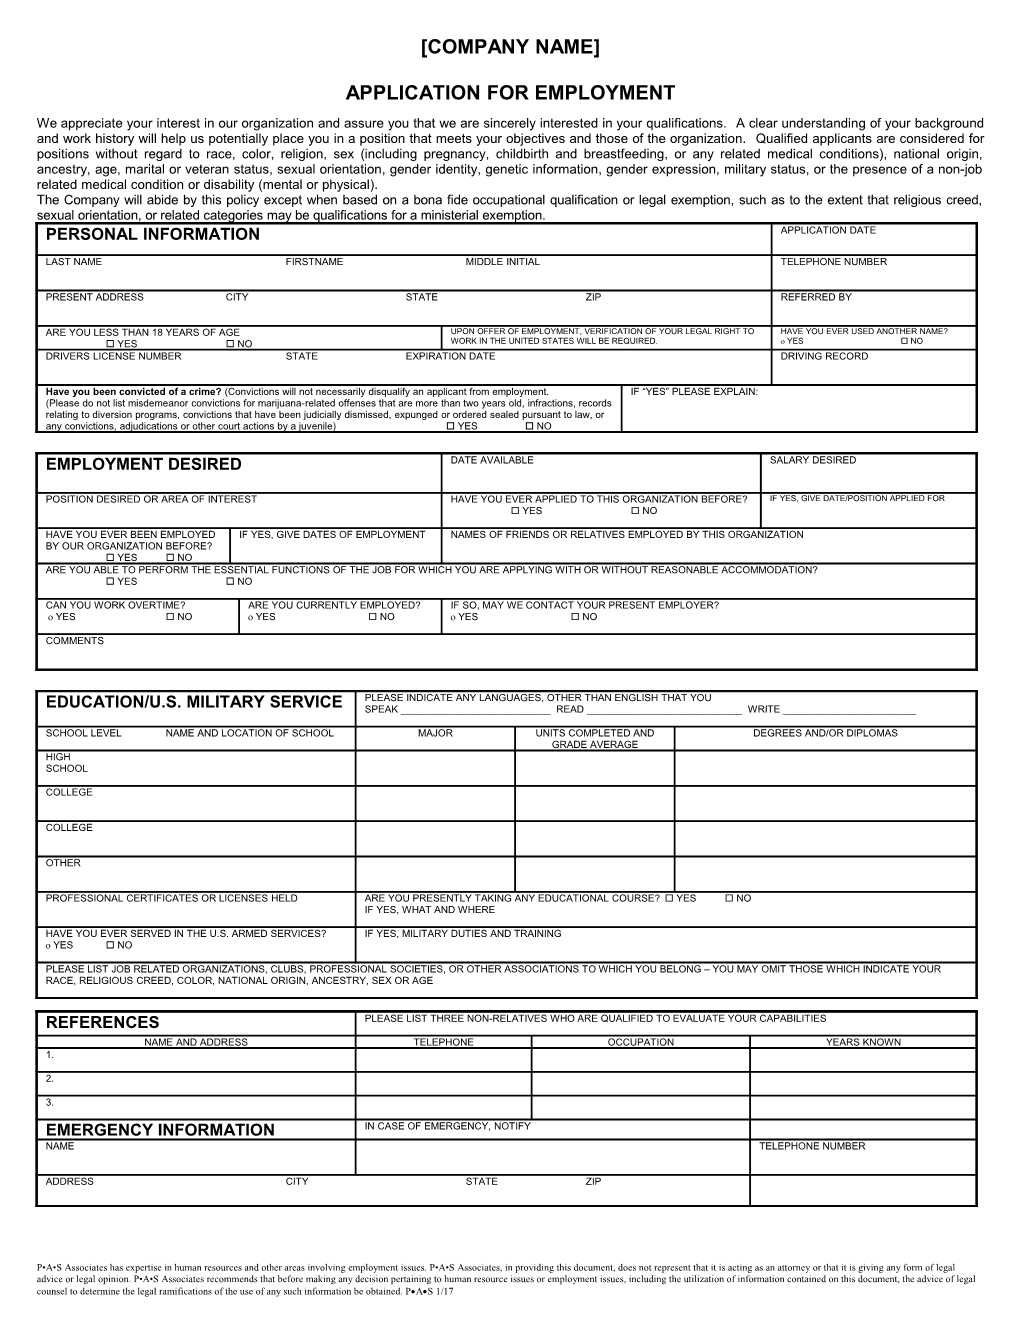 Application for Employment s82